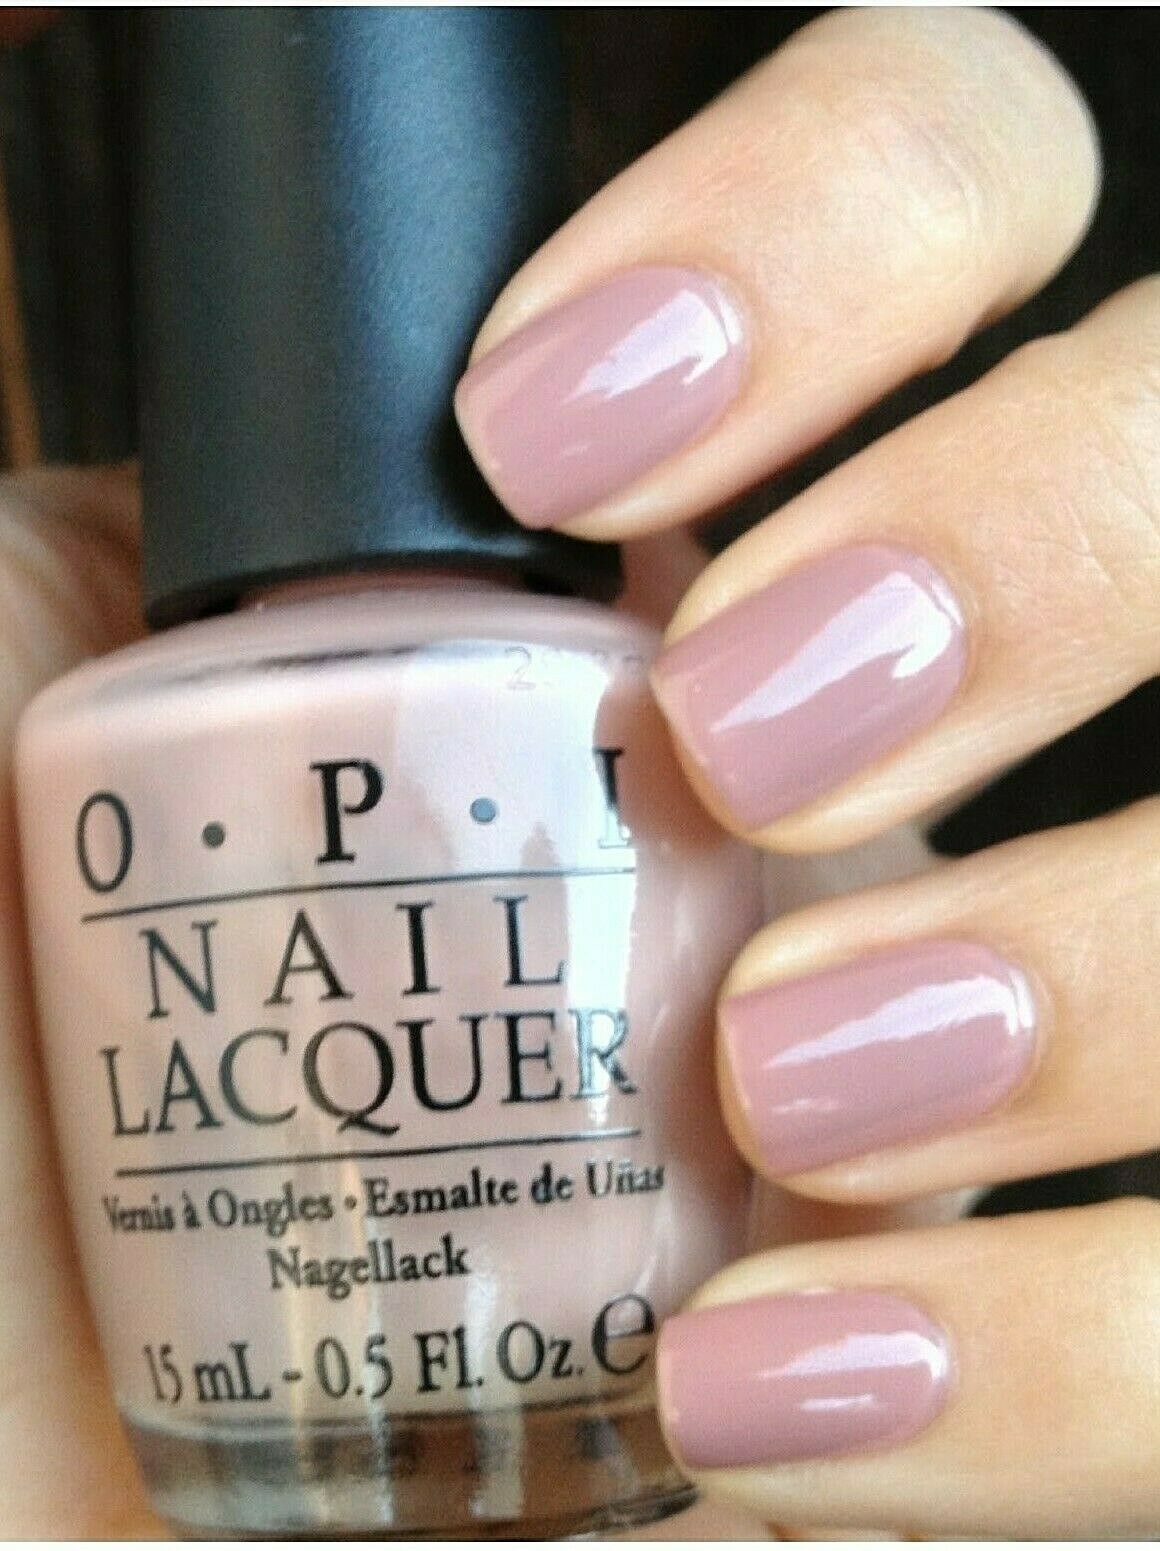 OPI TICKLE MY FRANCE-Y Naughty Nude Beige Light Tan Nail Polish Lacquer F16 New!